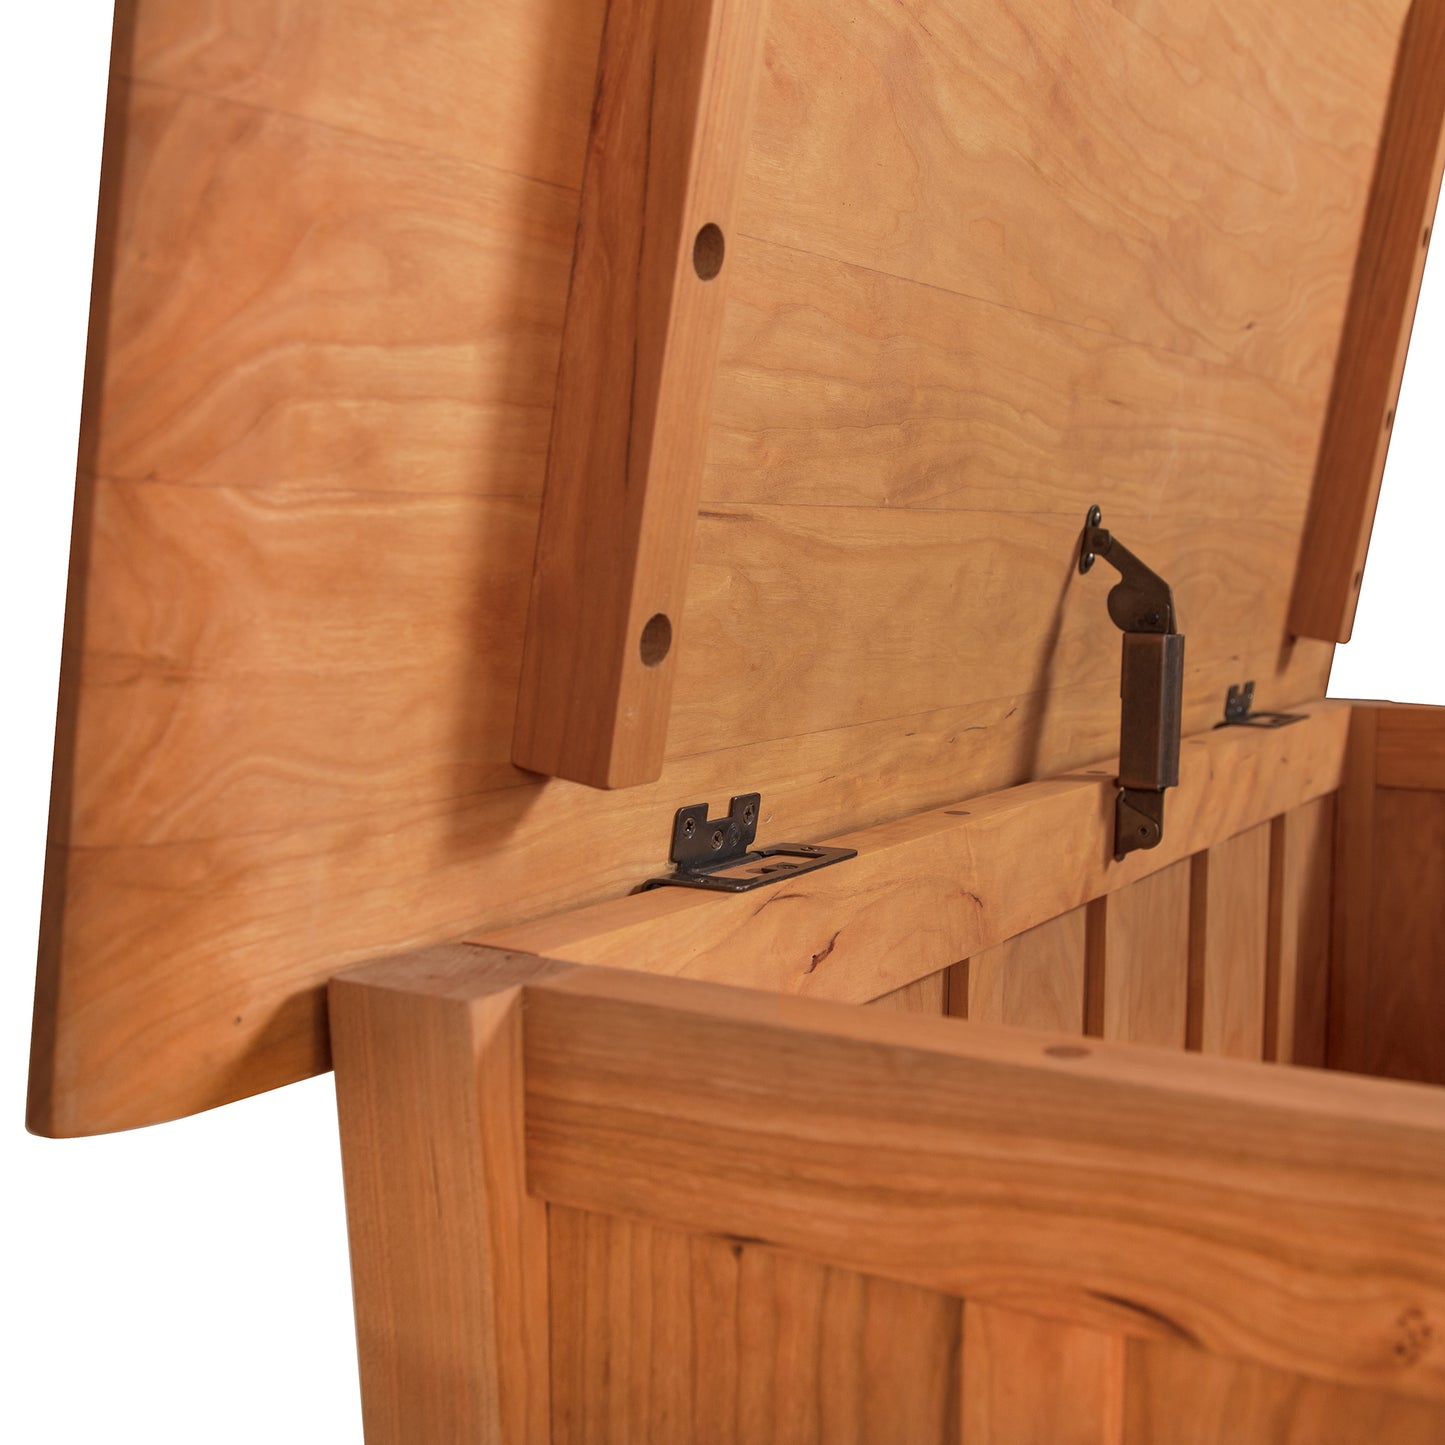 A close-up of a Vermont Furniture Designs Contemporary Craftsman Blanket Chest focusing on the joint and bracket hardware.